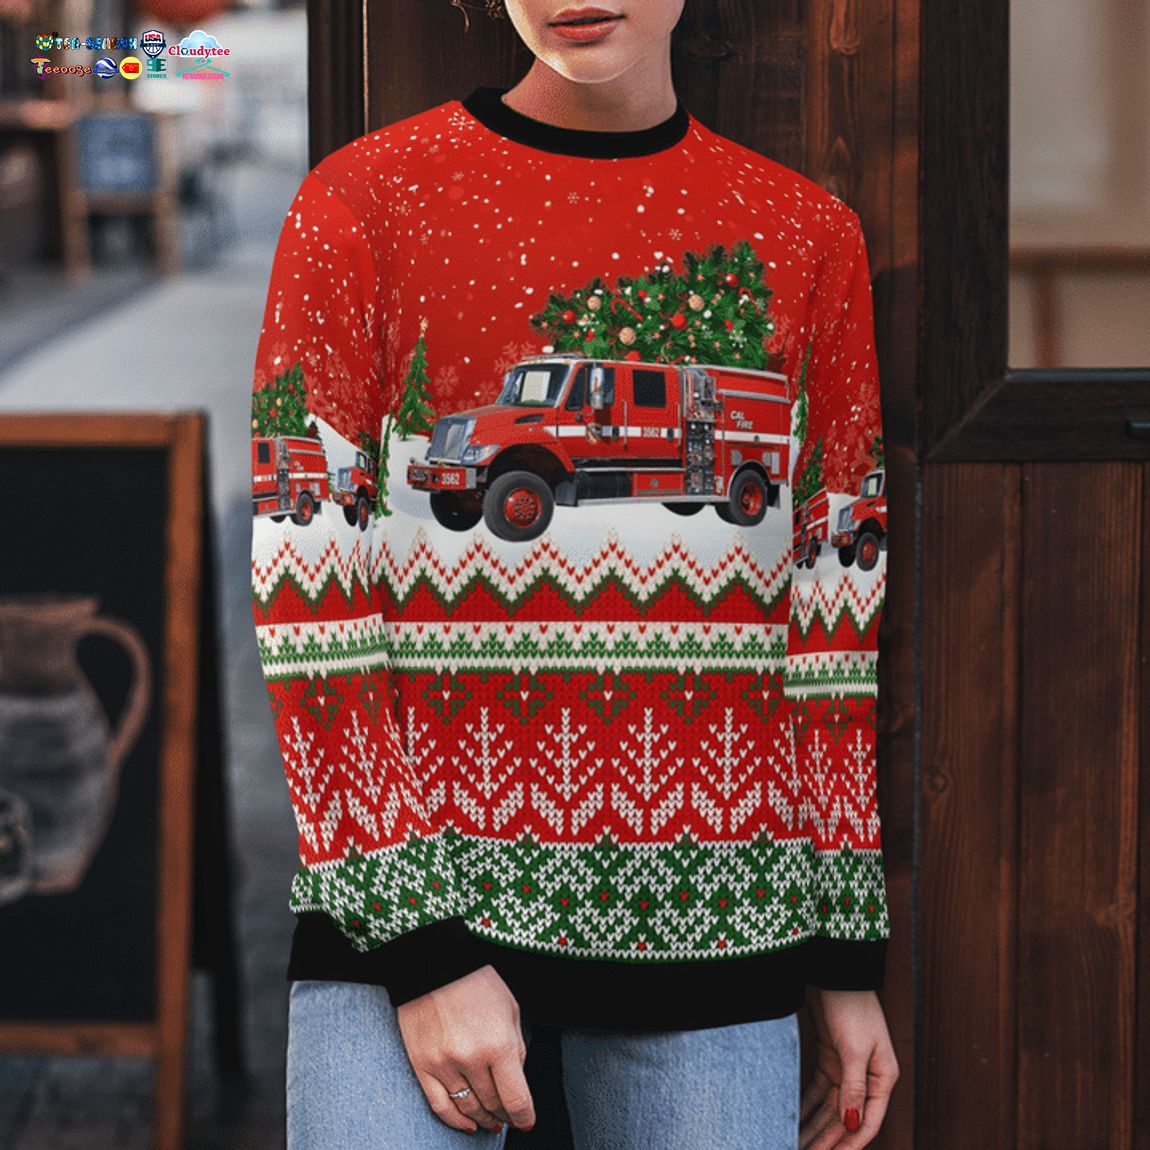 California Department Of Forestry And Fire Protection Type 3 Wildland Contract 3D Christmas Sweater